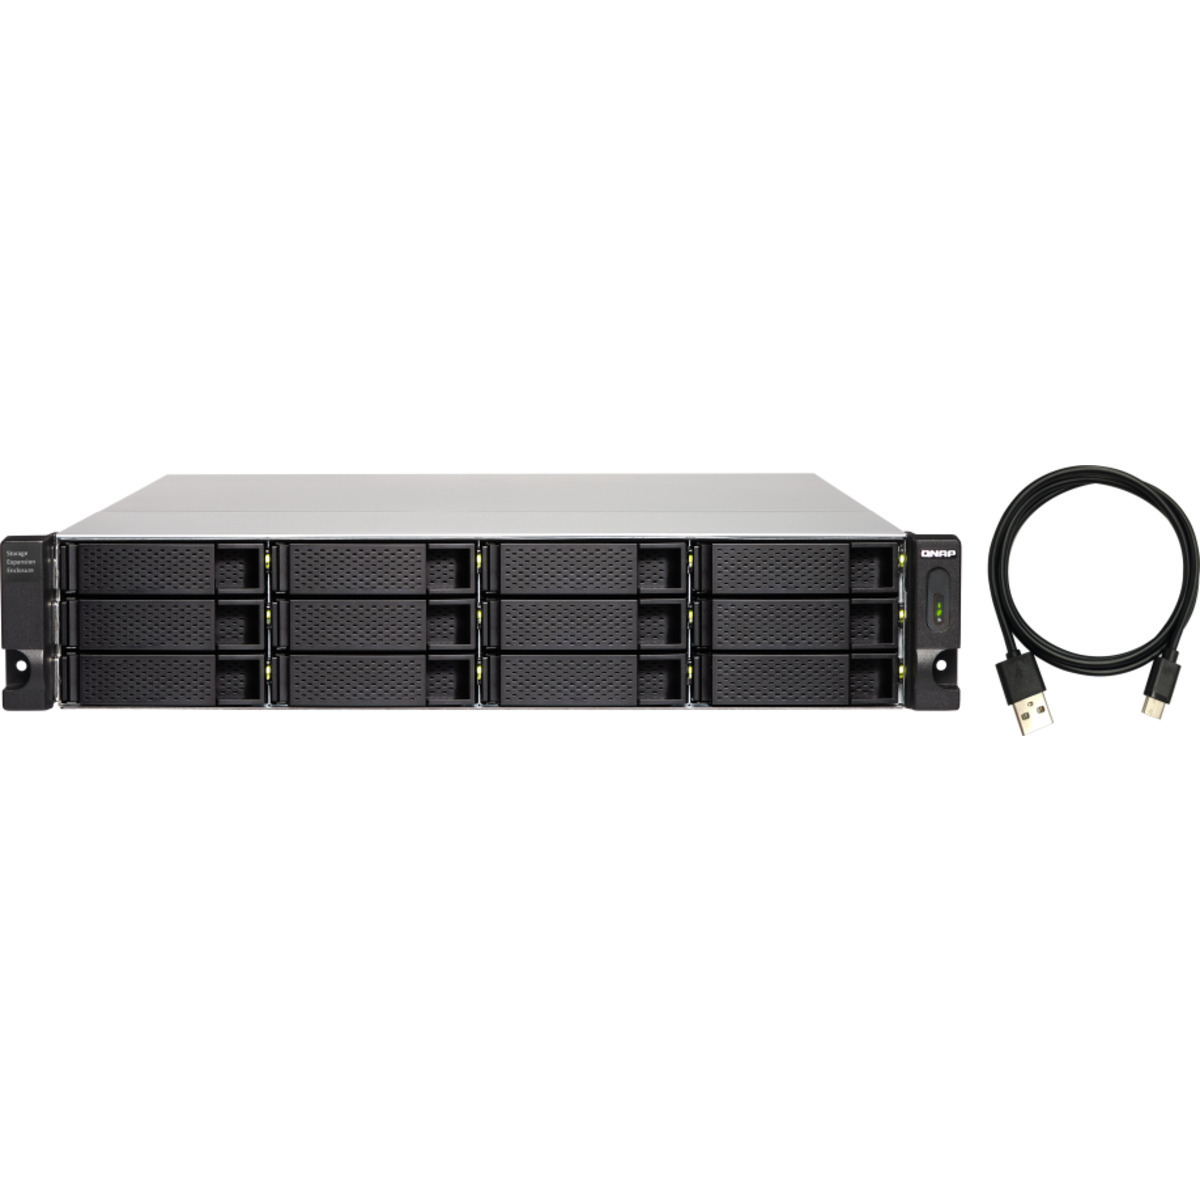 buy QNAP TL-R1200C-RP External Expansion Drive 24tb RackMount Expansion Enclosure 12x2000gb Seagate IronWolf Pro ST2000NT001 3.5 7200rpm SATA 6Gb/s HDD NAS Class Drives Installed - Burn-In Tested - nas headquarters buy network attached storage server device das new raid-5 free shipping usa spring sale TL-R1200C-RP External Expansion Drive